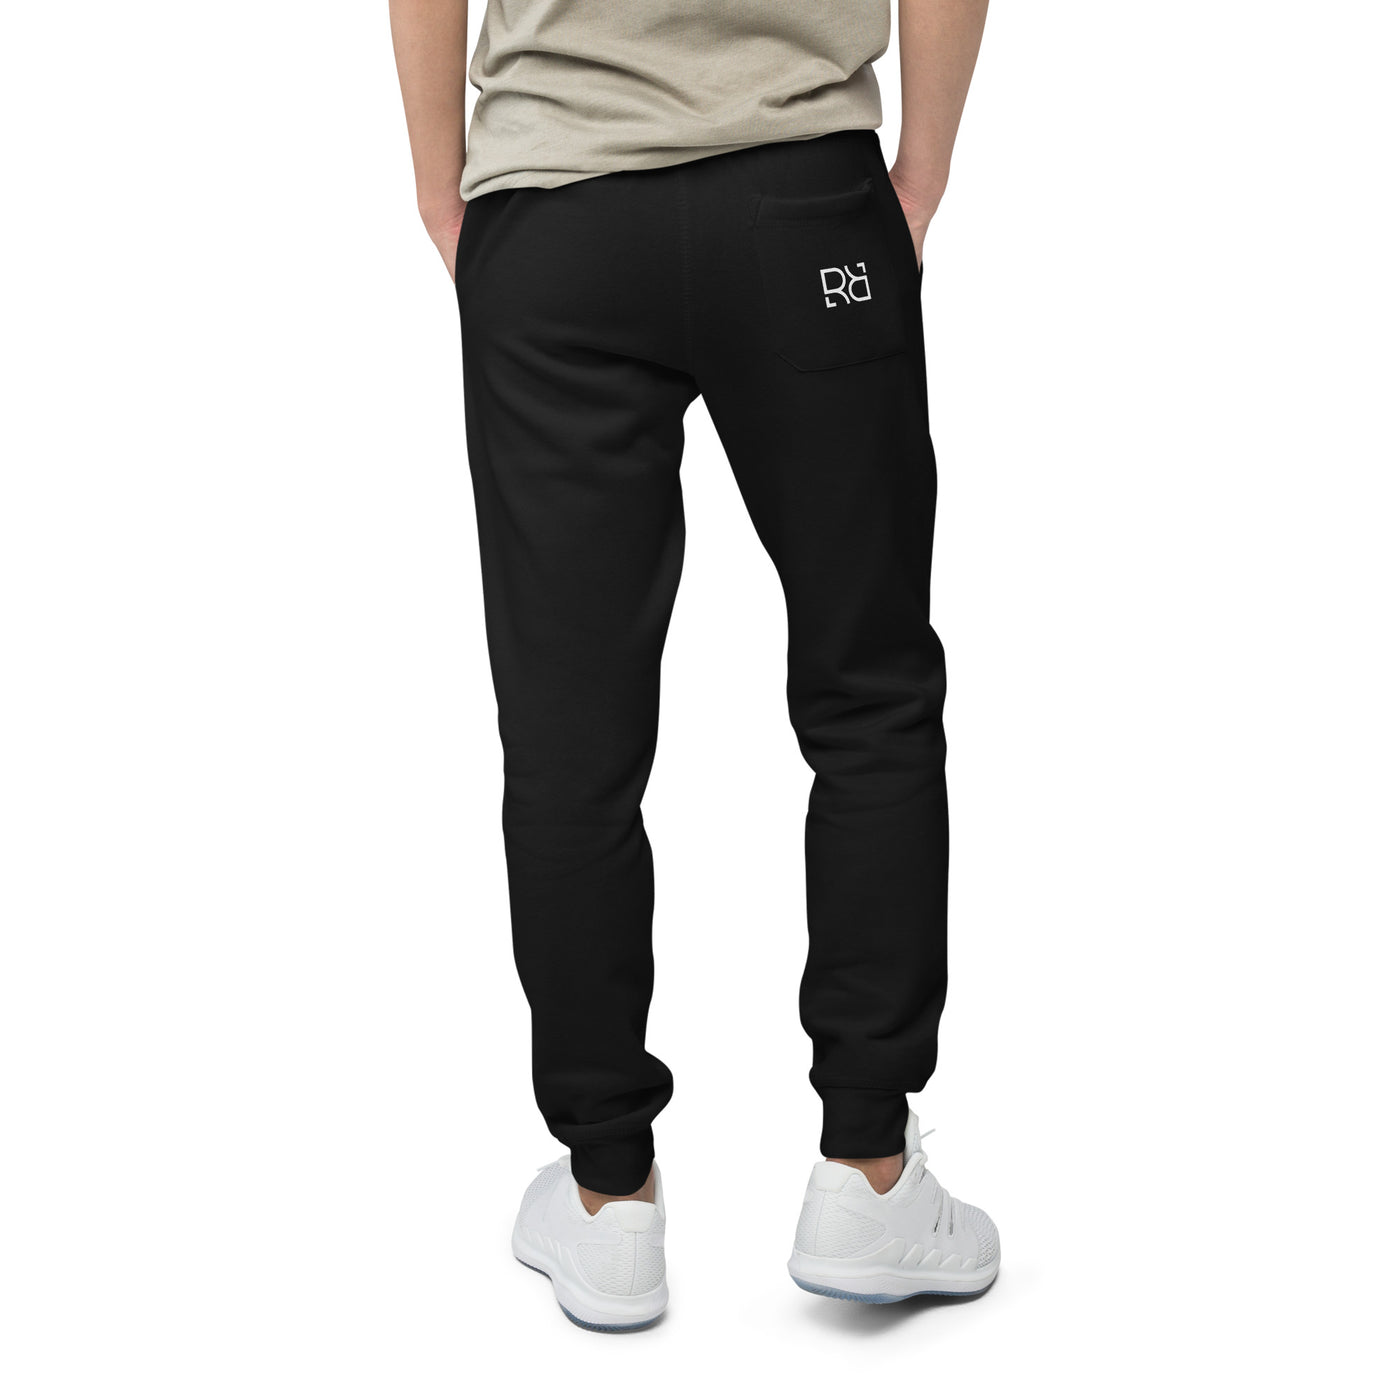 Man wearing Black Built Different leg design joggers with pockets